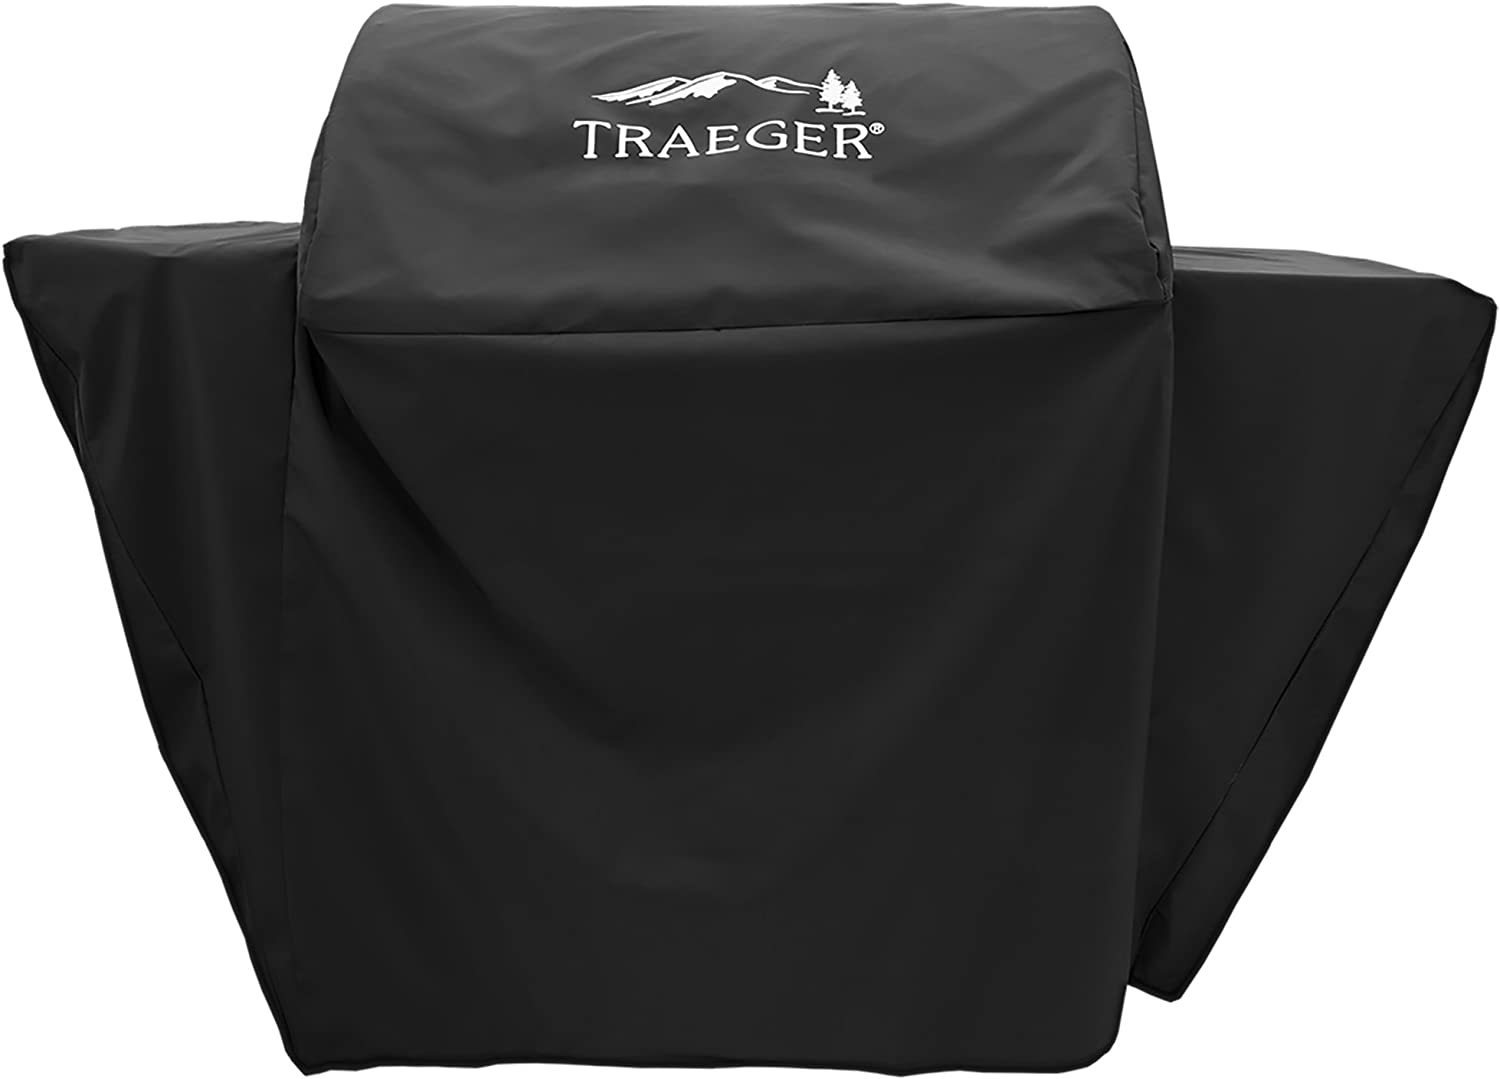 Traeger Full-Length Grill Cover - Select - $89.99